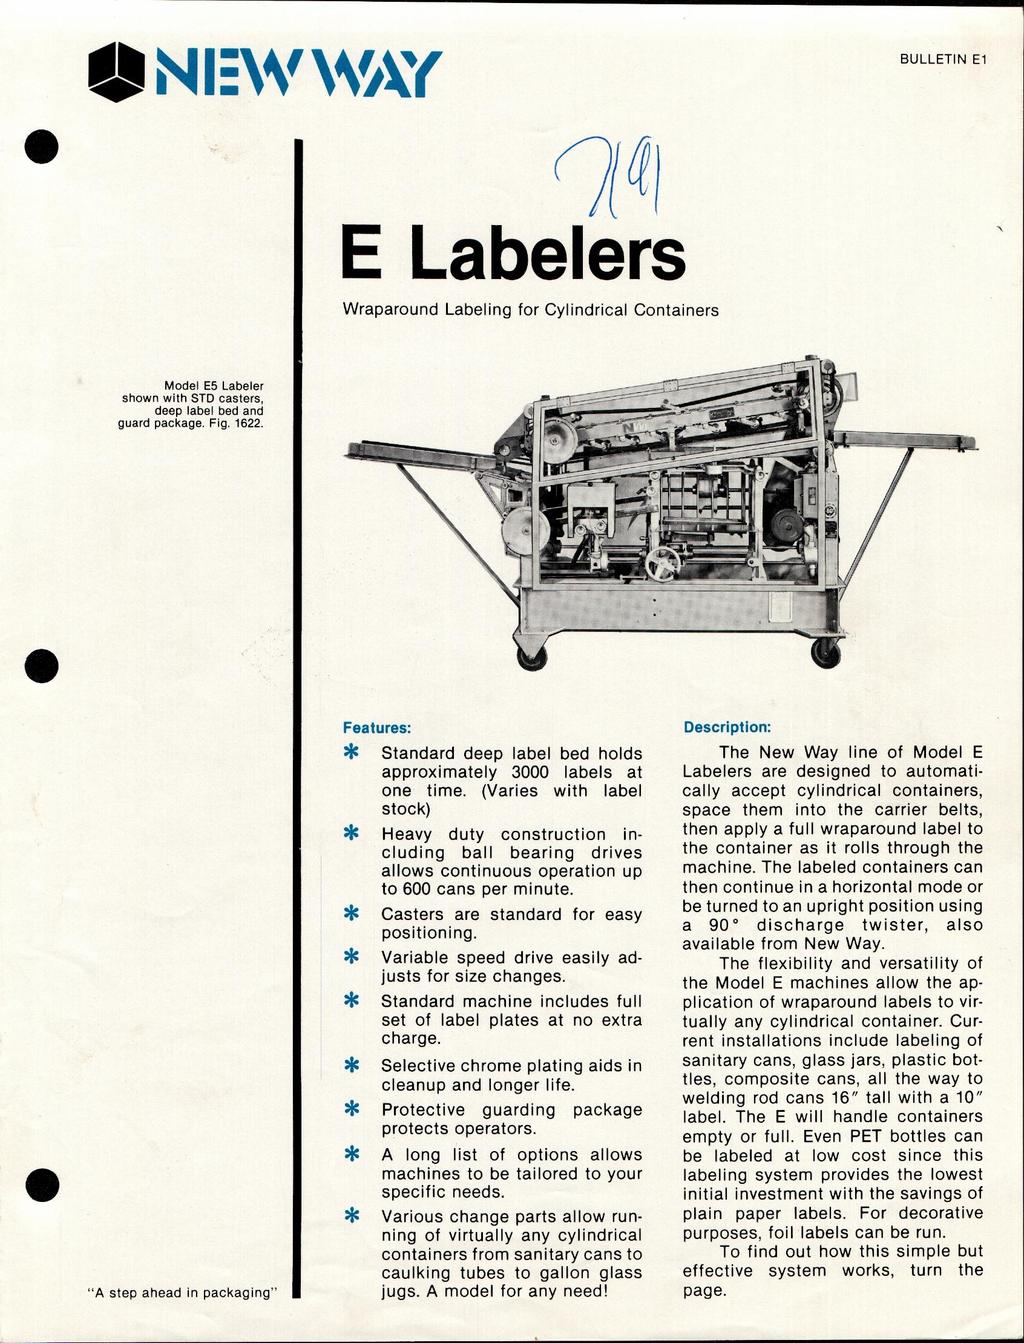 NI I EW WAY BULLETIN El E Labelers Wraparound Labeling for Cylindrical Containers Model E5 Labeler shown with STD casters, deep label bed and guard package. Fig. 1622.